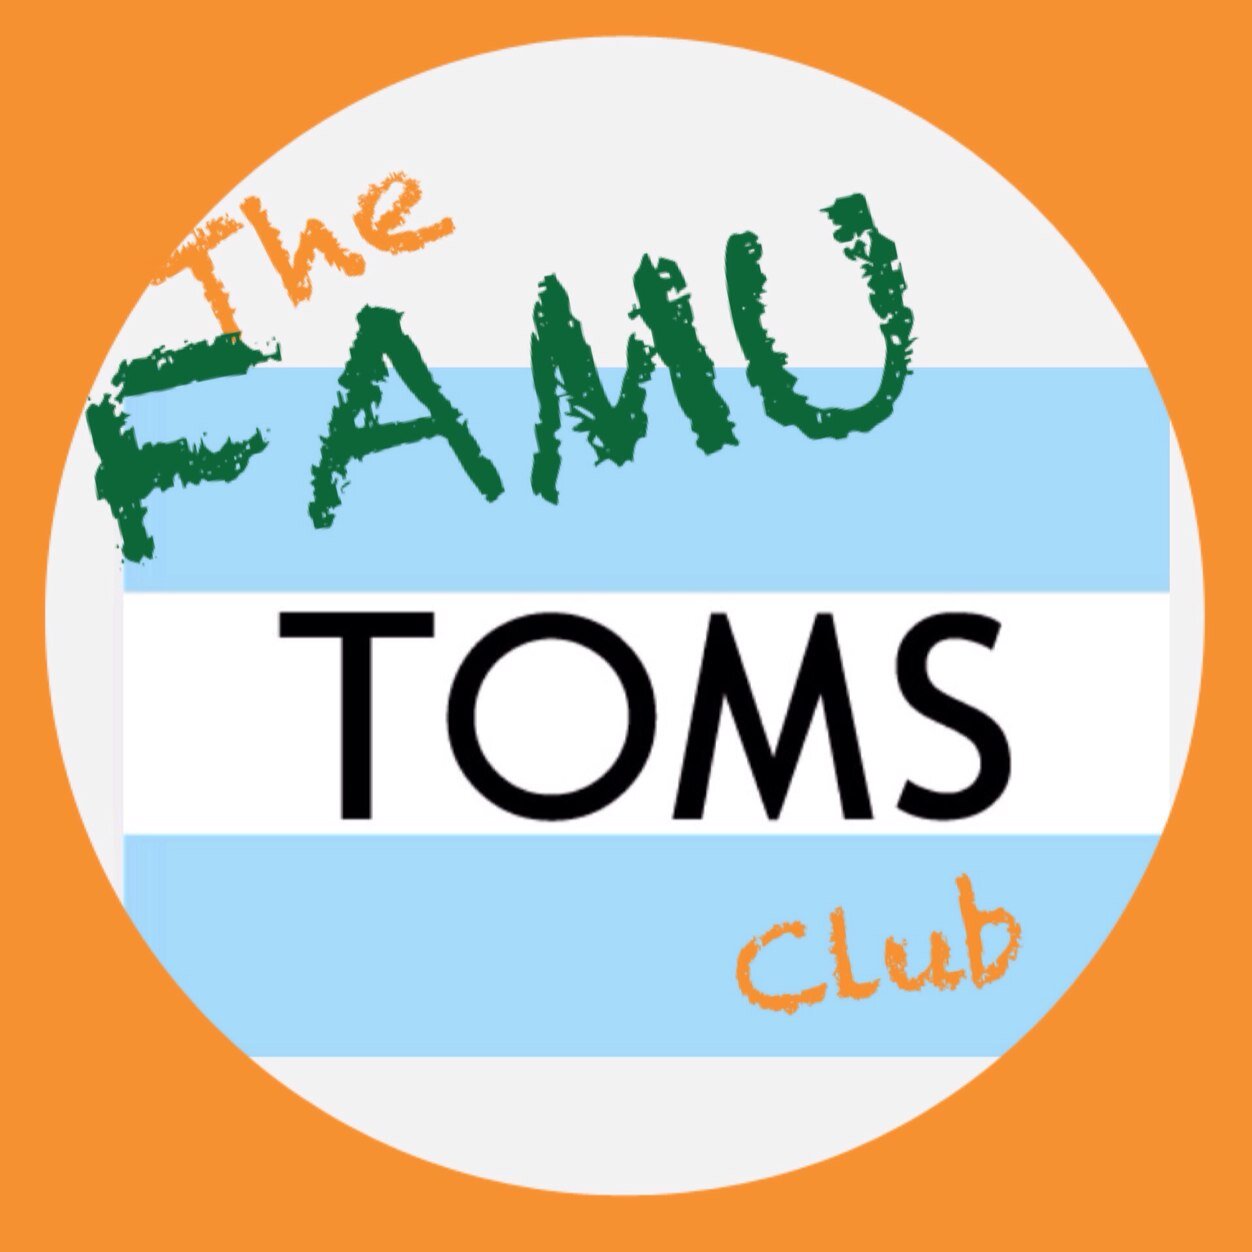 ONE FOR ONE + RATTLERS = SERVICE 
Email us your info to get involved at tomsfamu@gmail.com